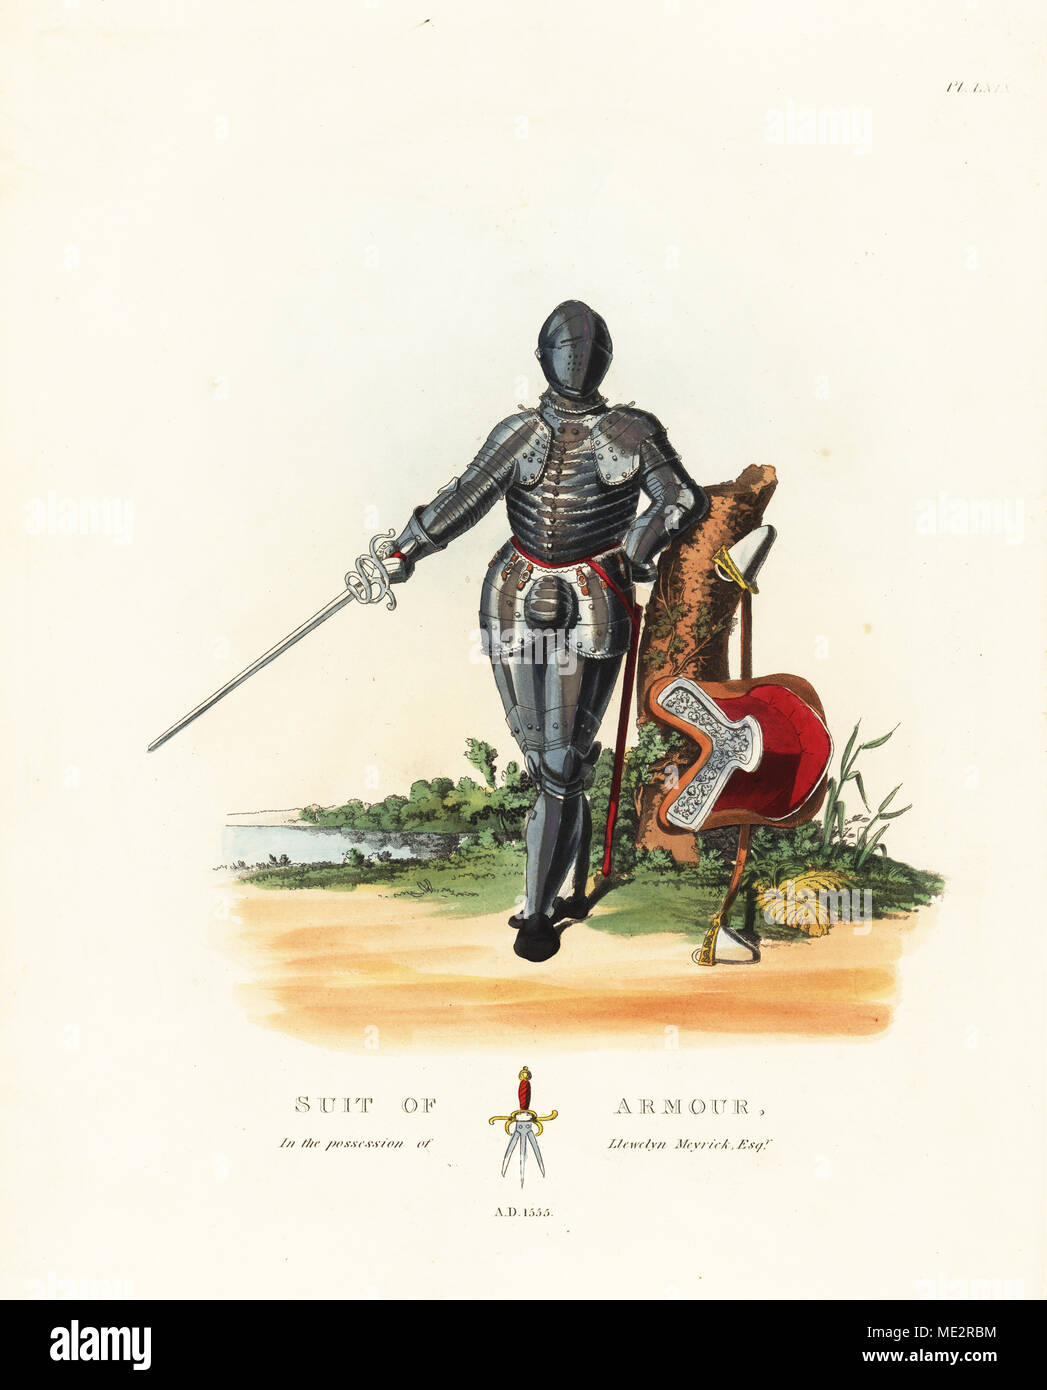 Suit of armour of an Italian man at arms of Count Gironi, Bologna, 1555. The suit has flexible splints at elbows, breastplate and backplate, and a flexible codpiece for comfort when seated in the saddle. Geman pennated dagger at bottom. Handcoloured lithograph by Maddocks after an illustration by S.R. Meyrick from Sir Samuel Rush Meyrick's A Critical Inquiry into Antient Armour, John Dowding, London, 1842. Stock Photo